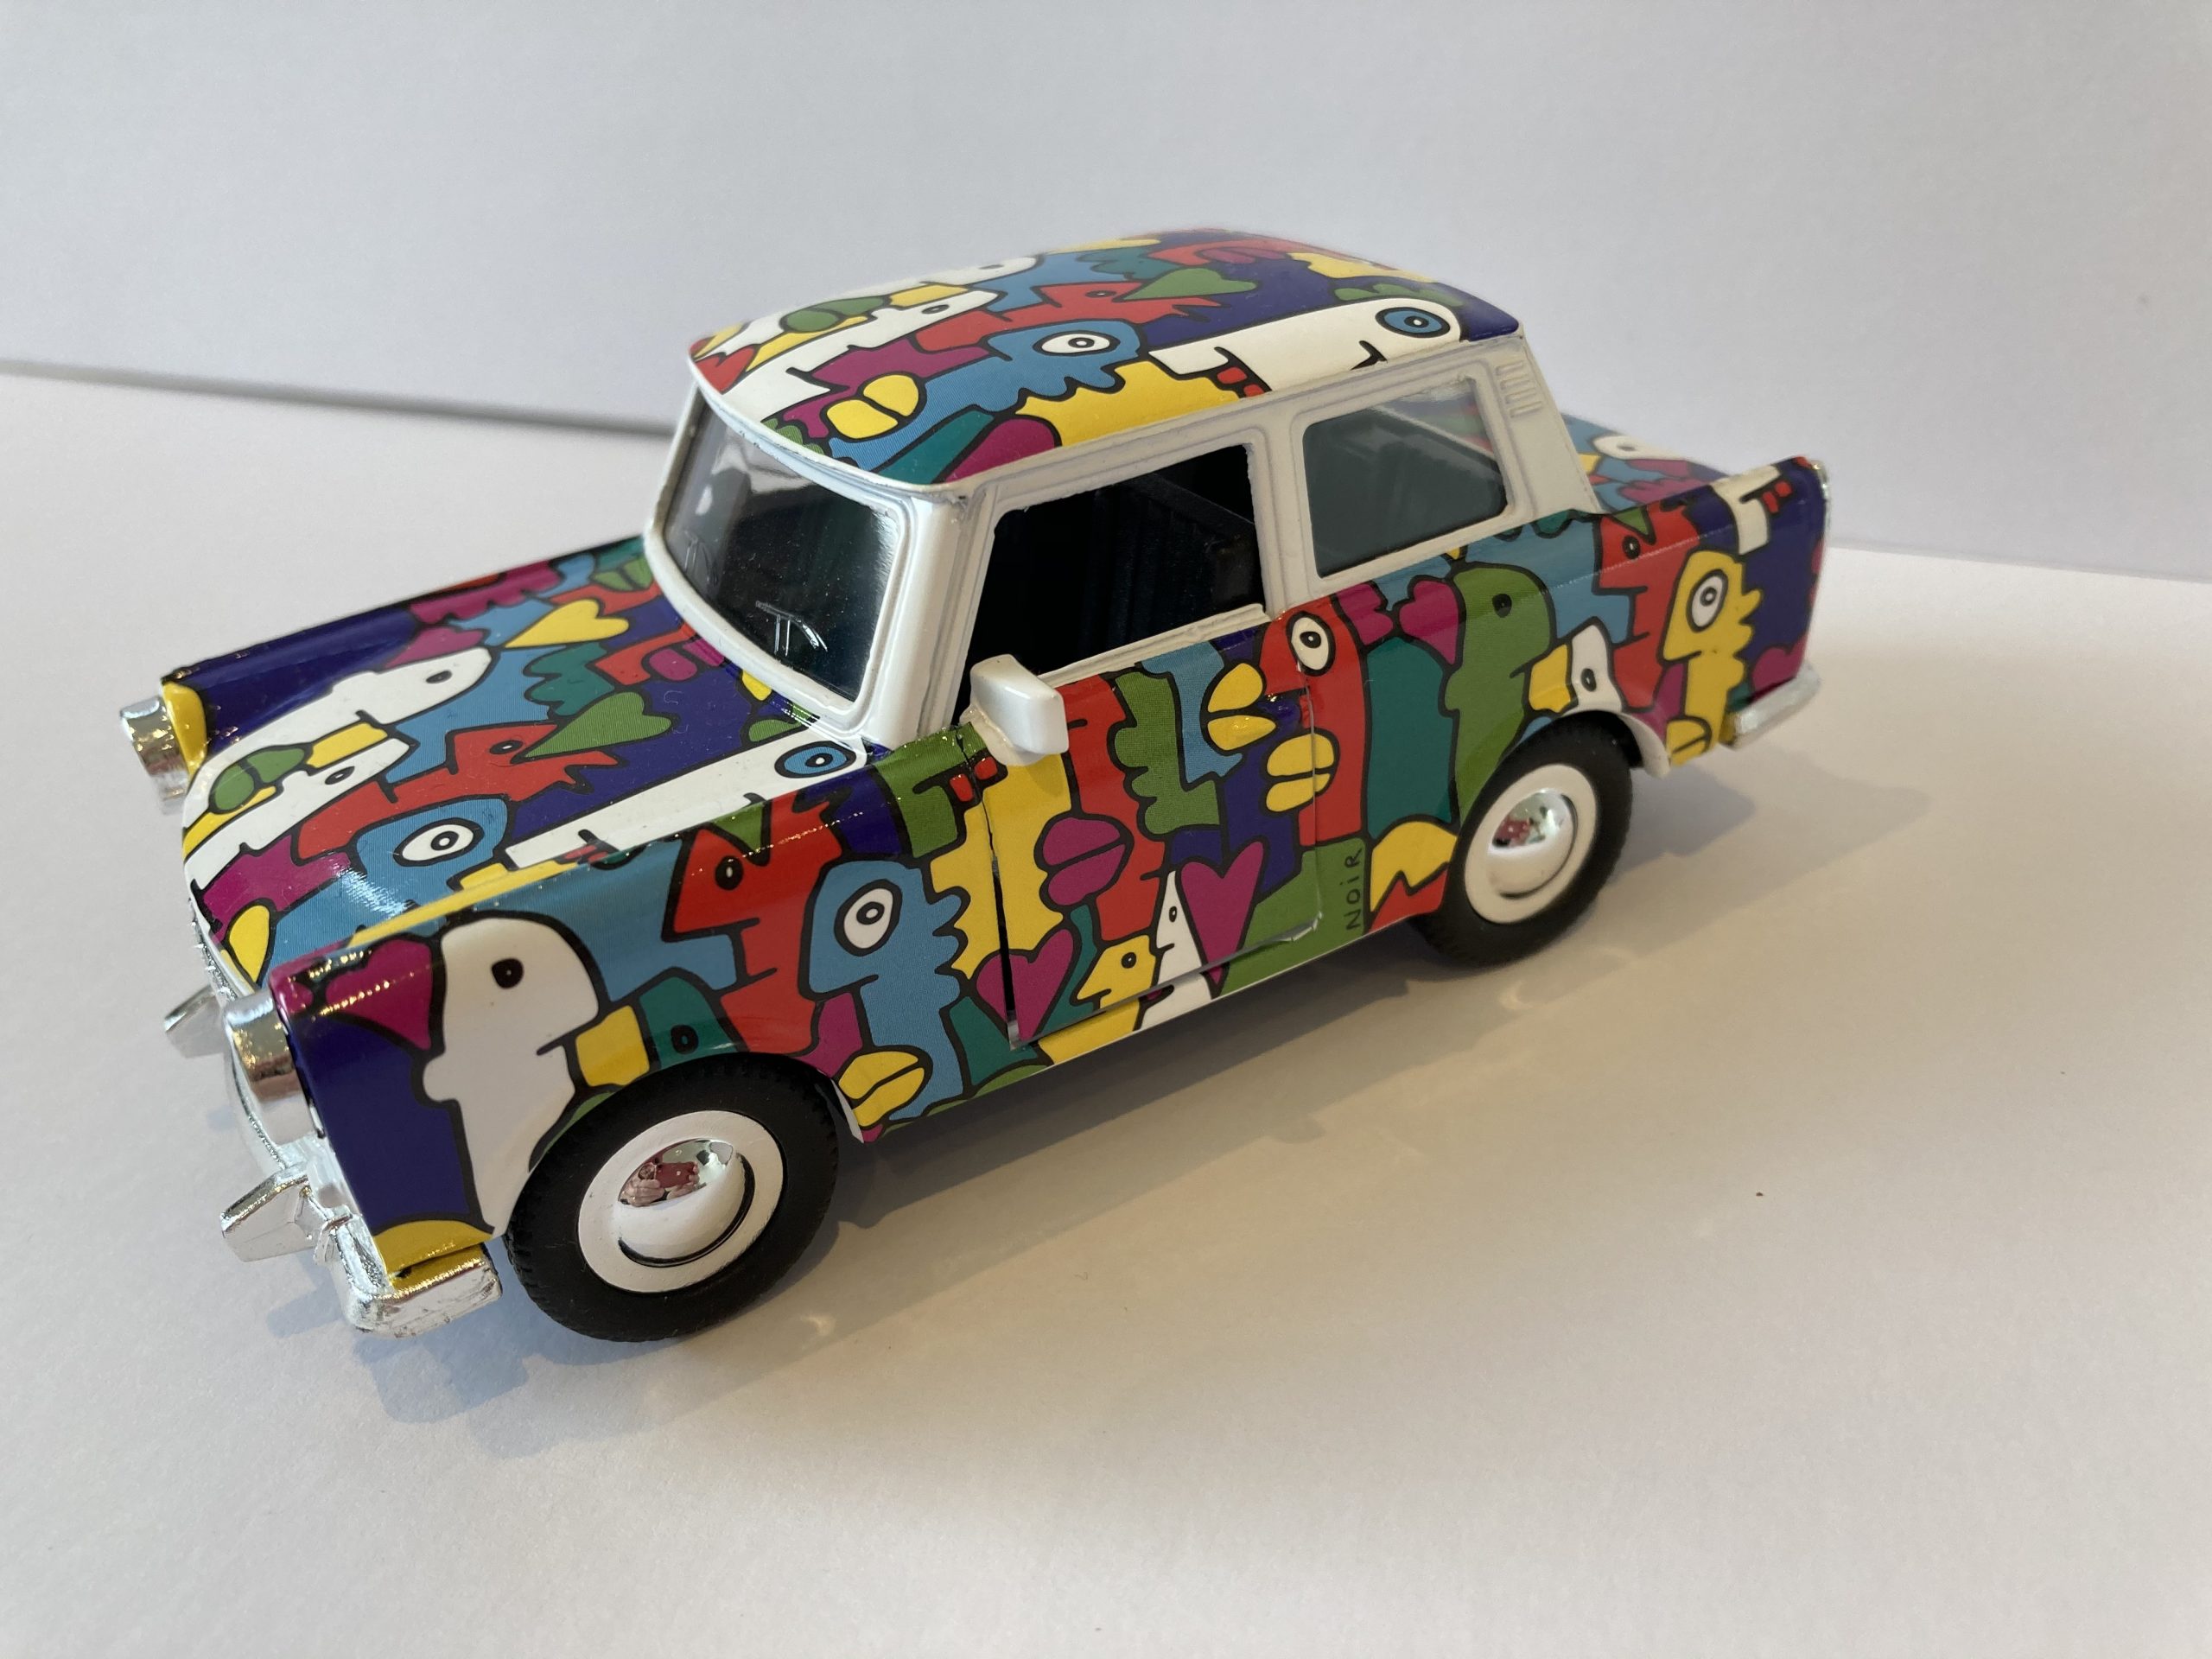 trabant-thierry-noir-side-view